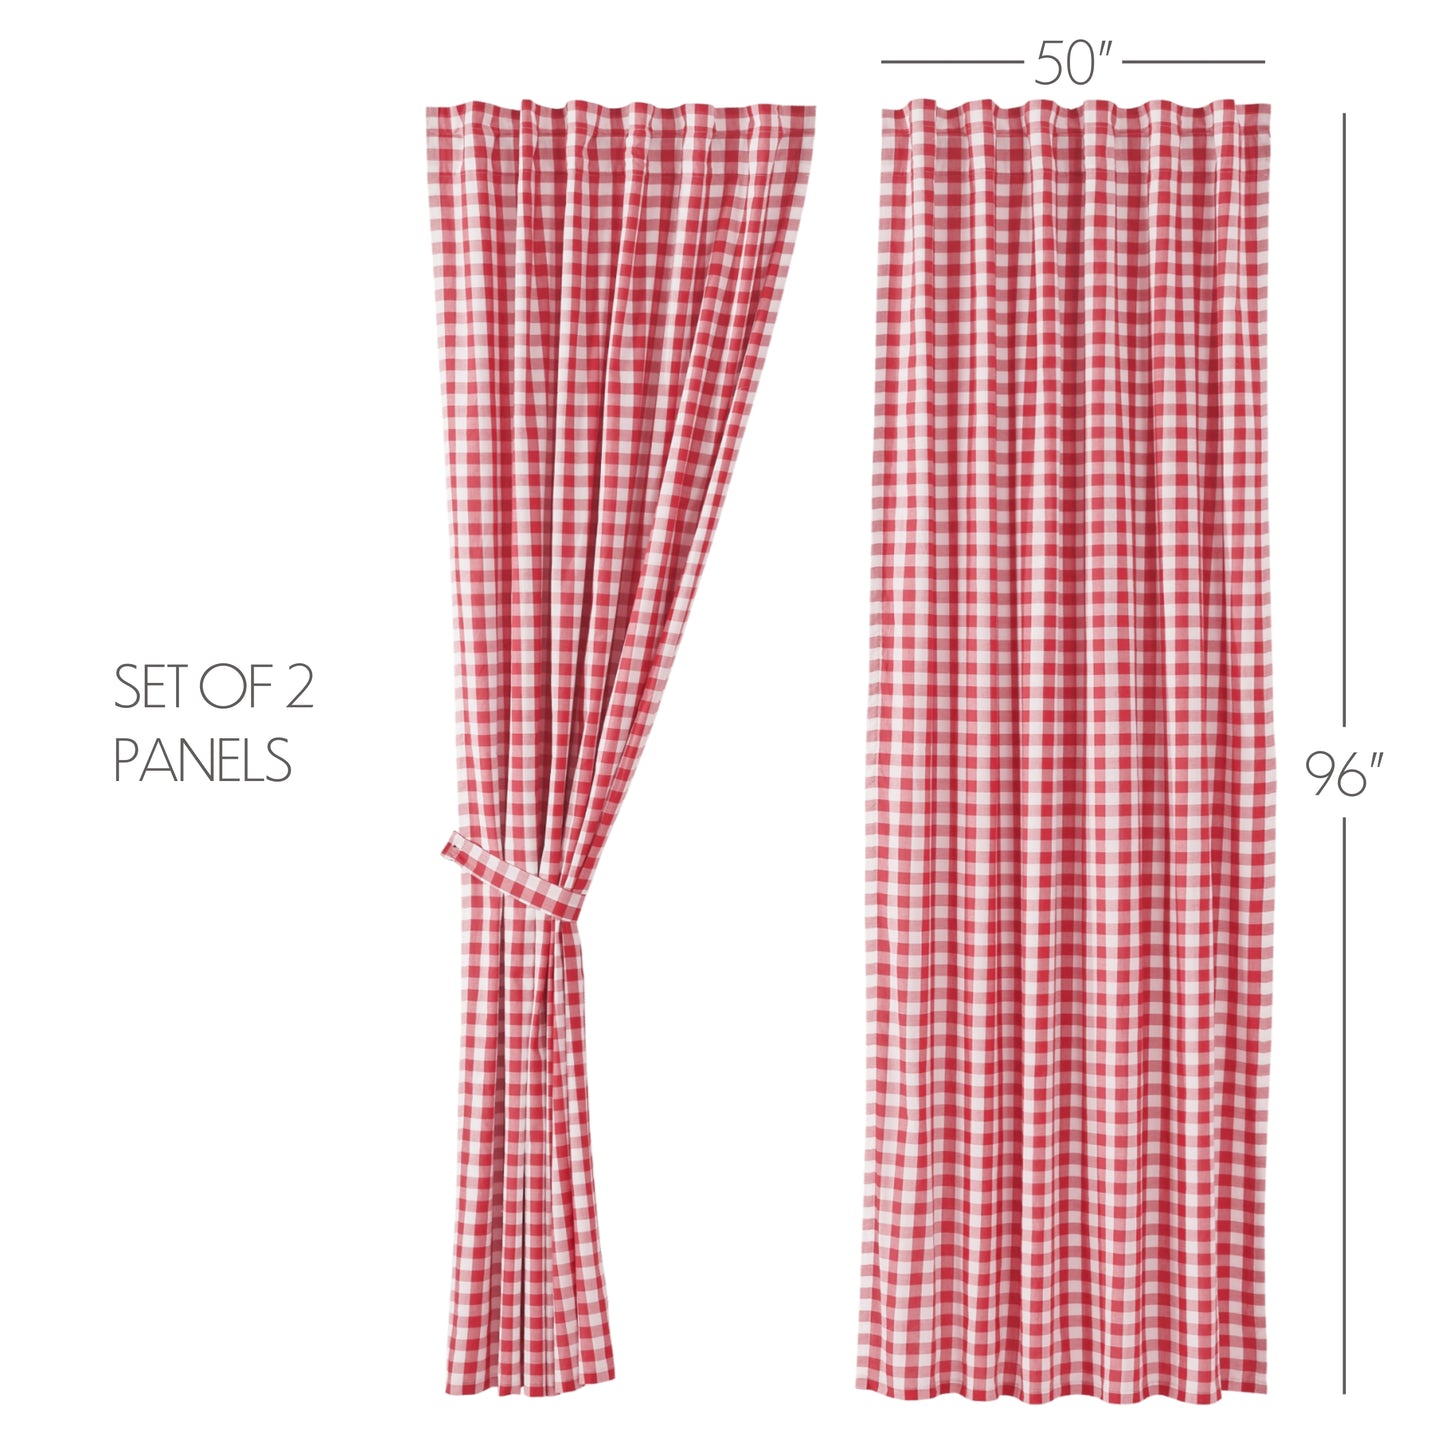 81487-Annie-Buffalo-Red-Check-Panel-Set-of-2-96x50-image-1